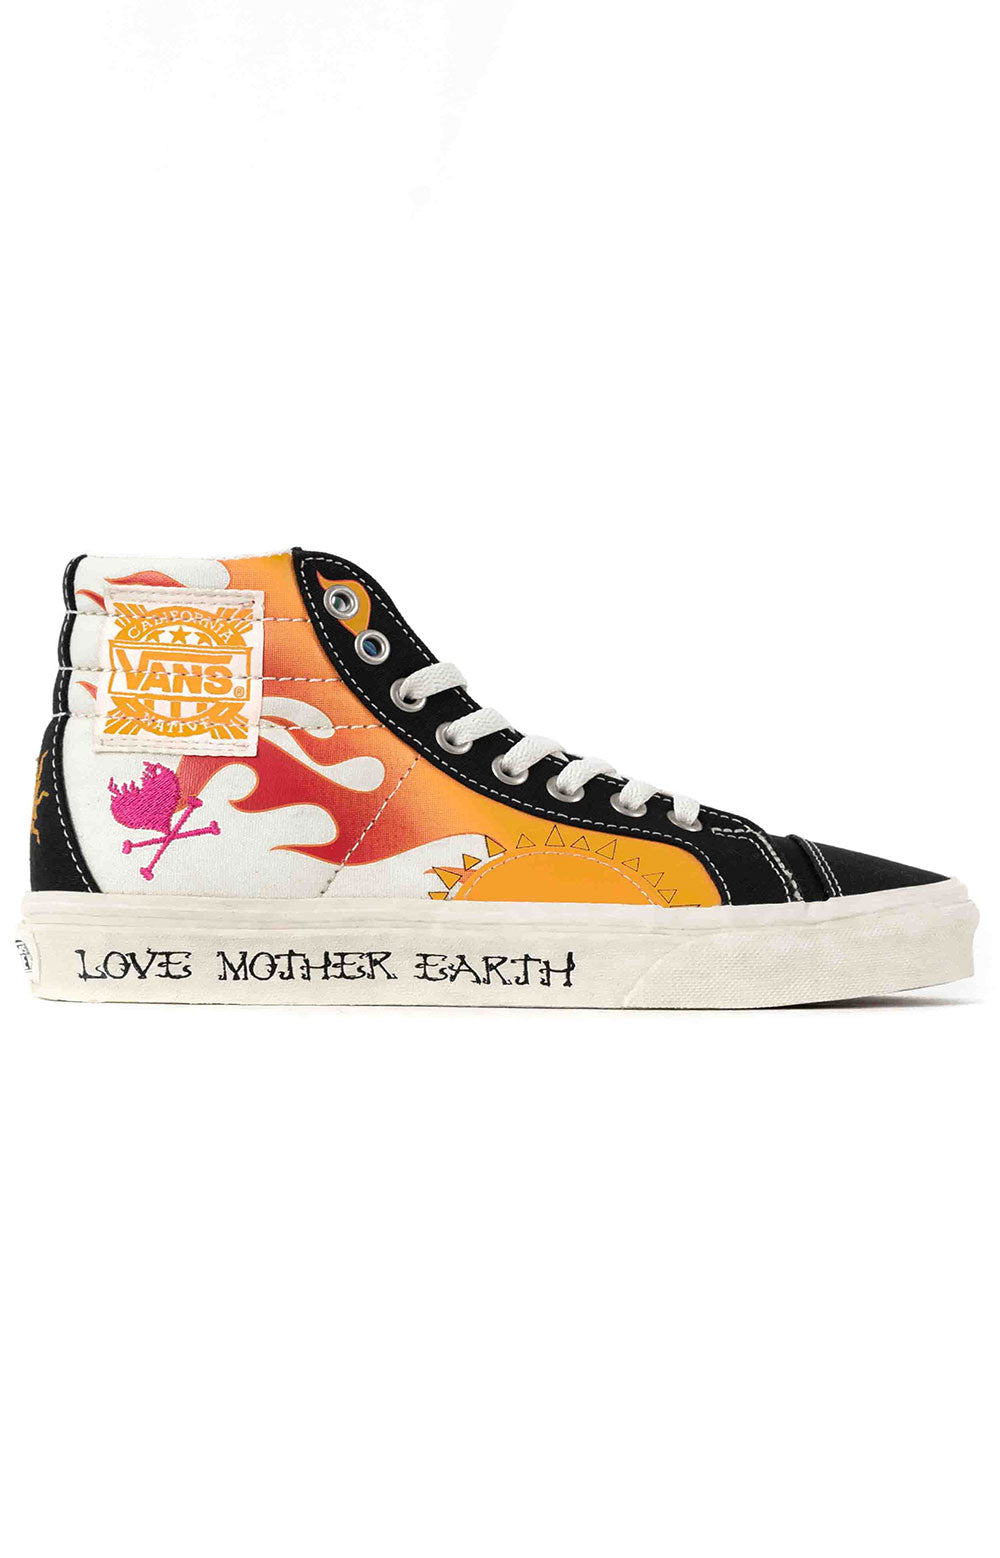 (JFIWZ2) Mother Earth Style 238 Shoes - Elements Marshmallow